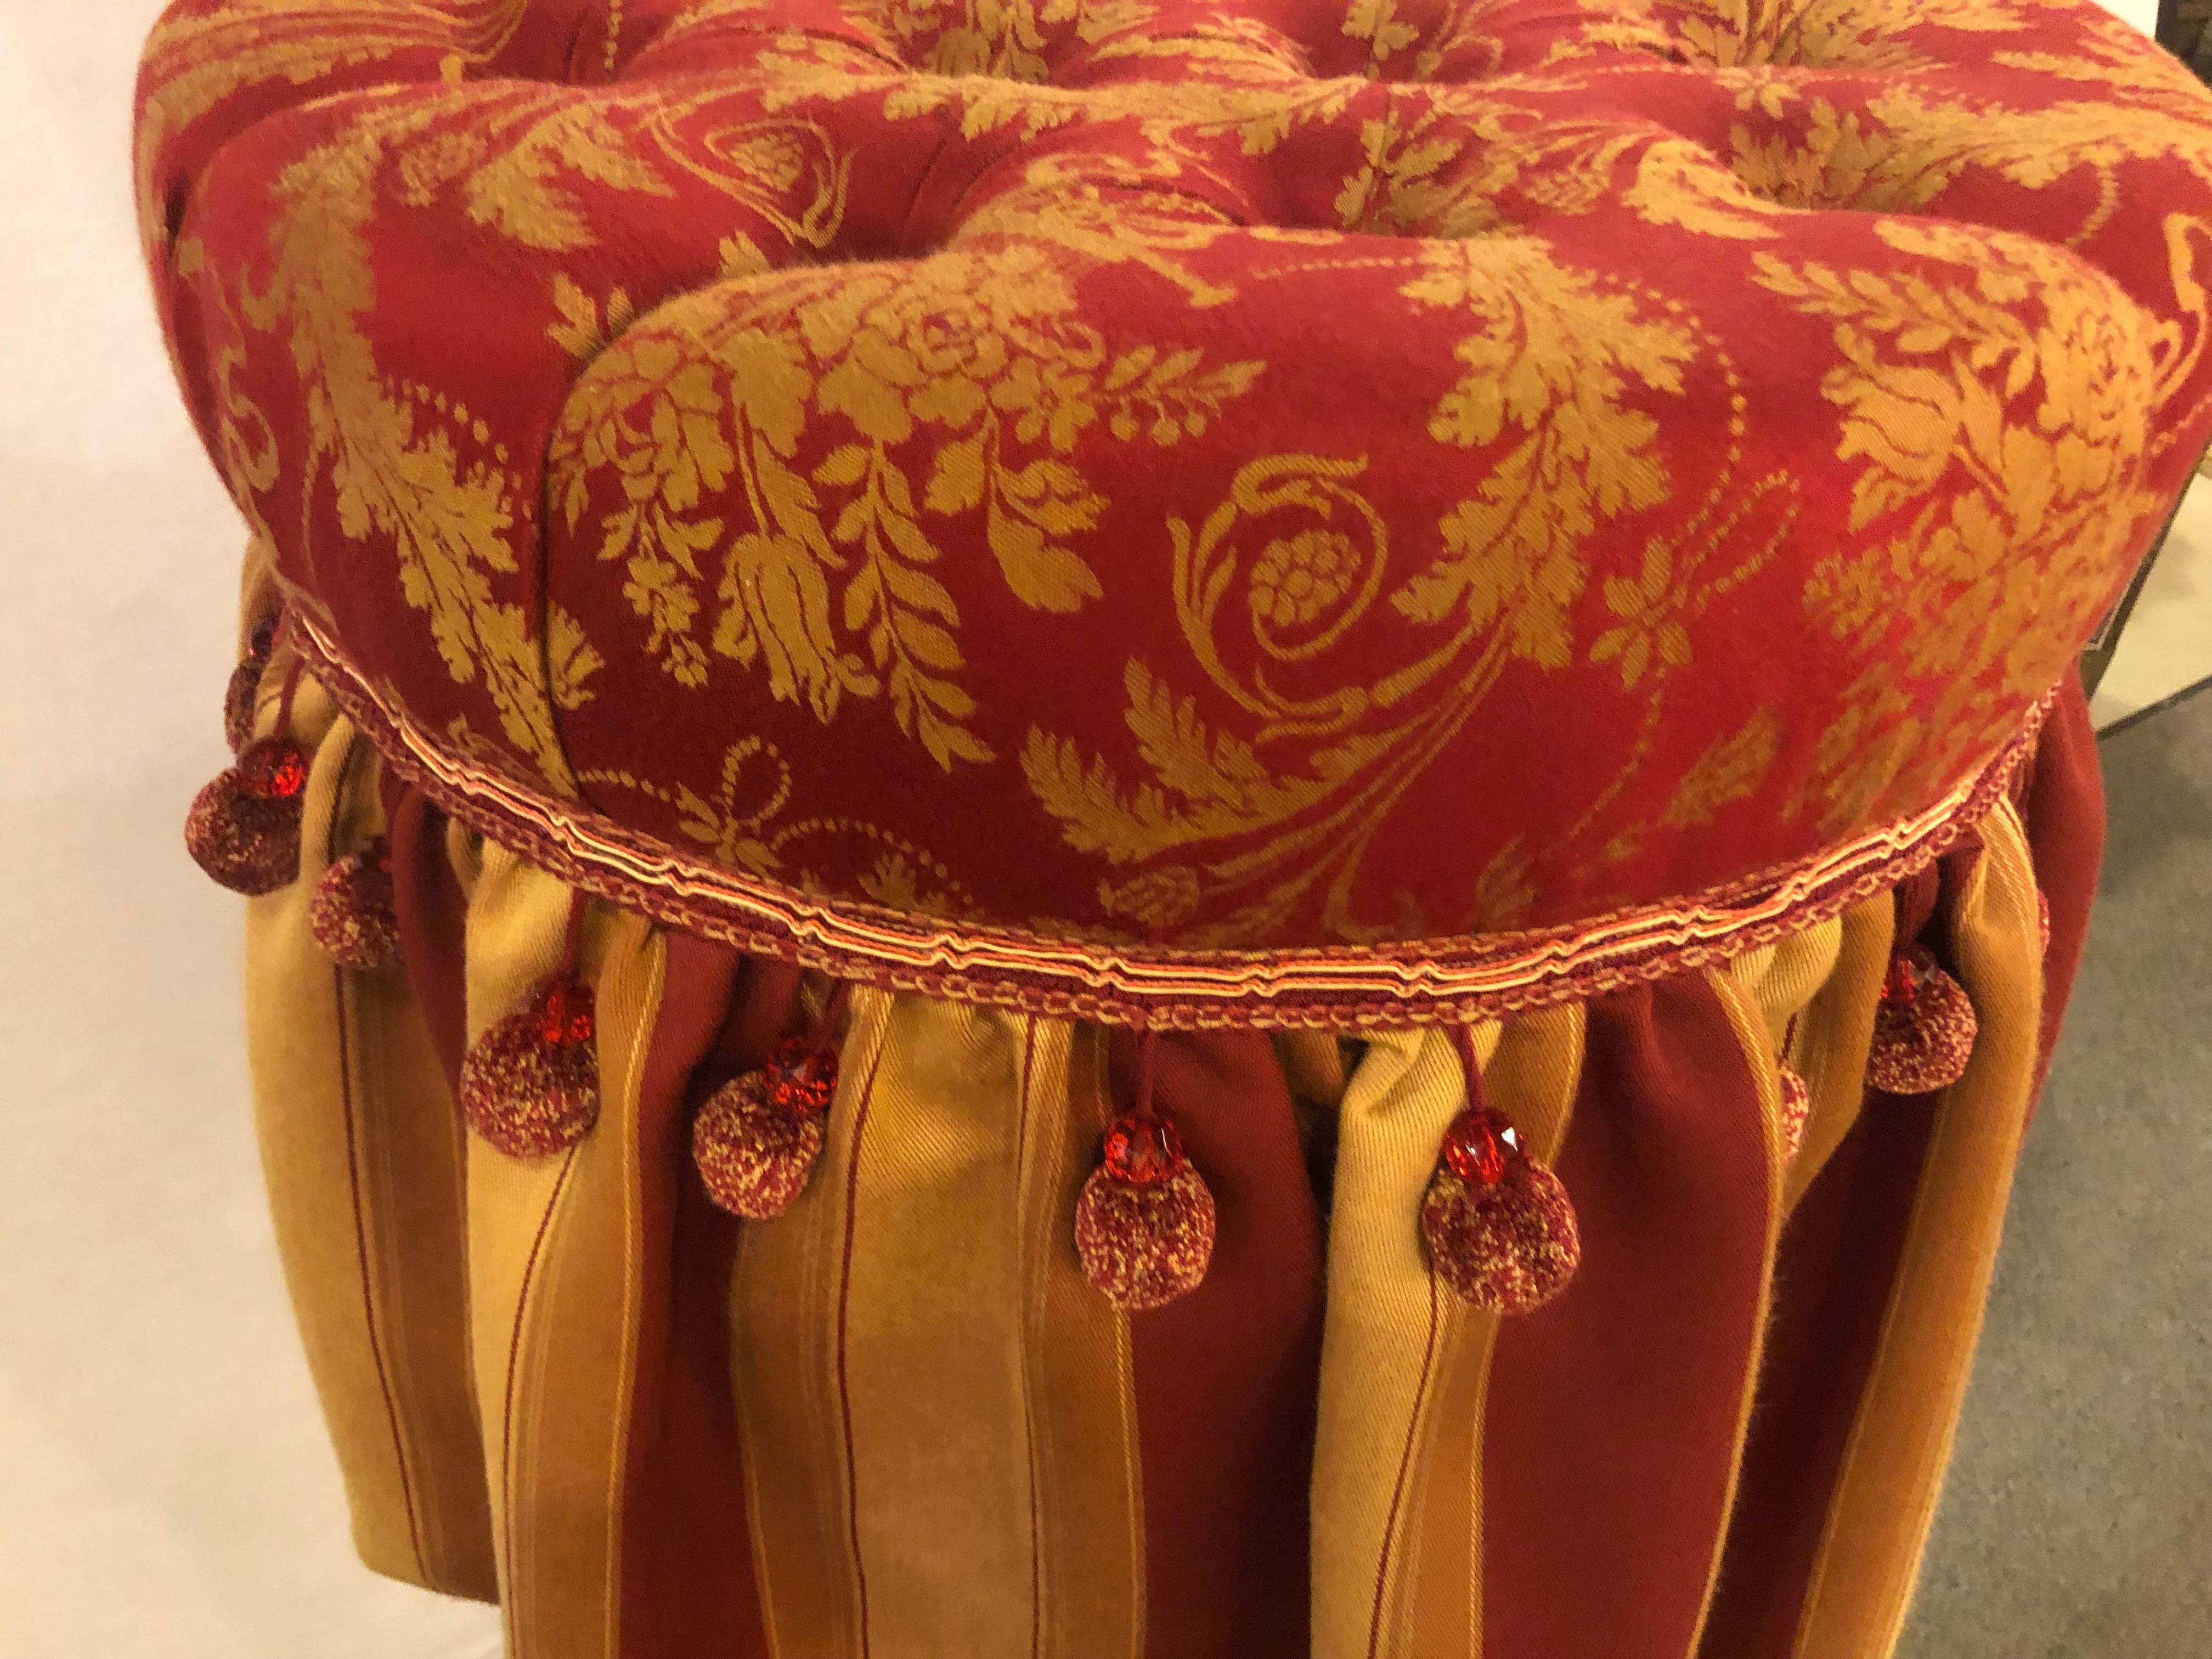 Deco Upholstered Tufted Red and Gilt Decorated Ottoman or Footstool (Hollywood Regency)